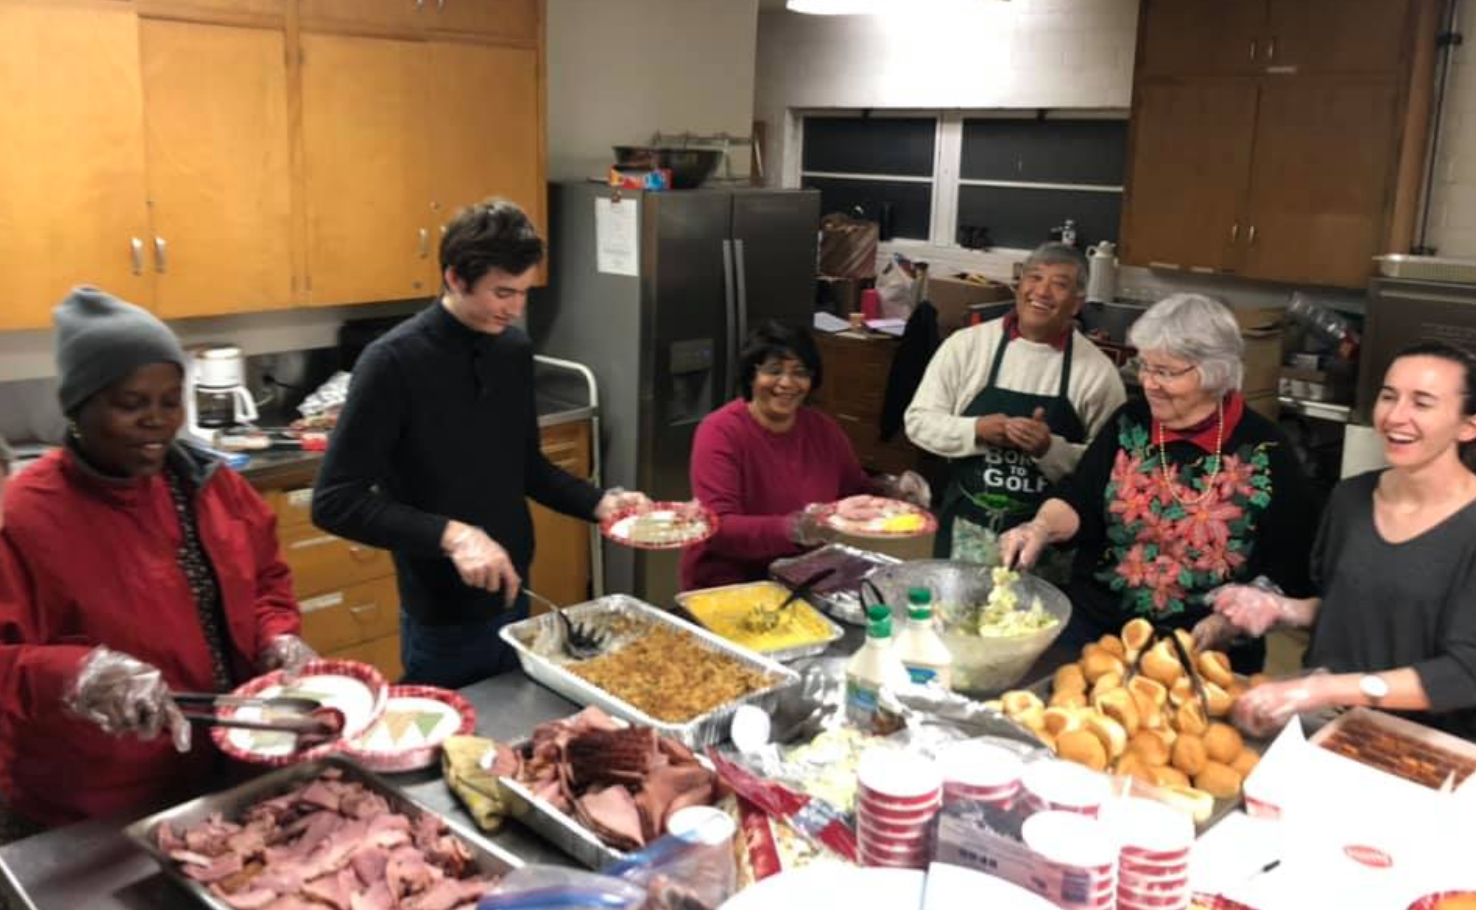 Preparing Christmas dinner at the BSW, 2019